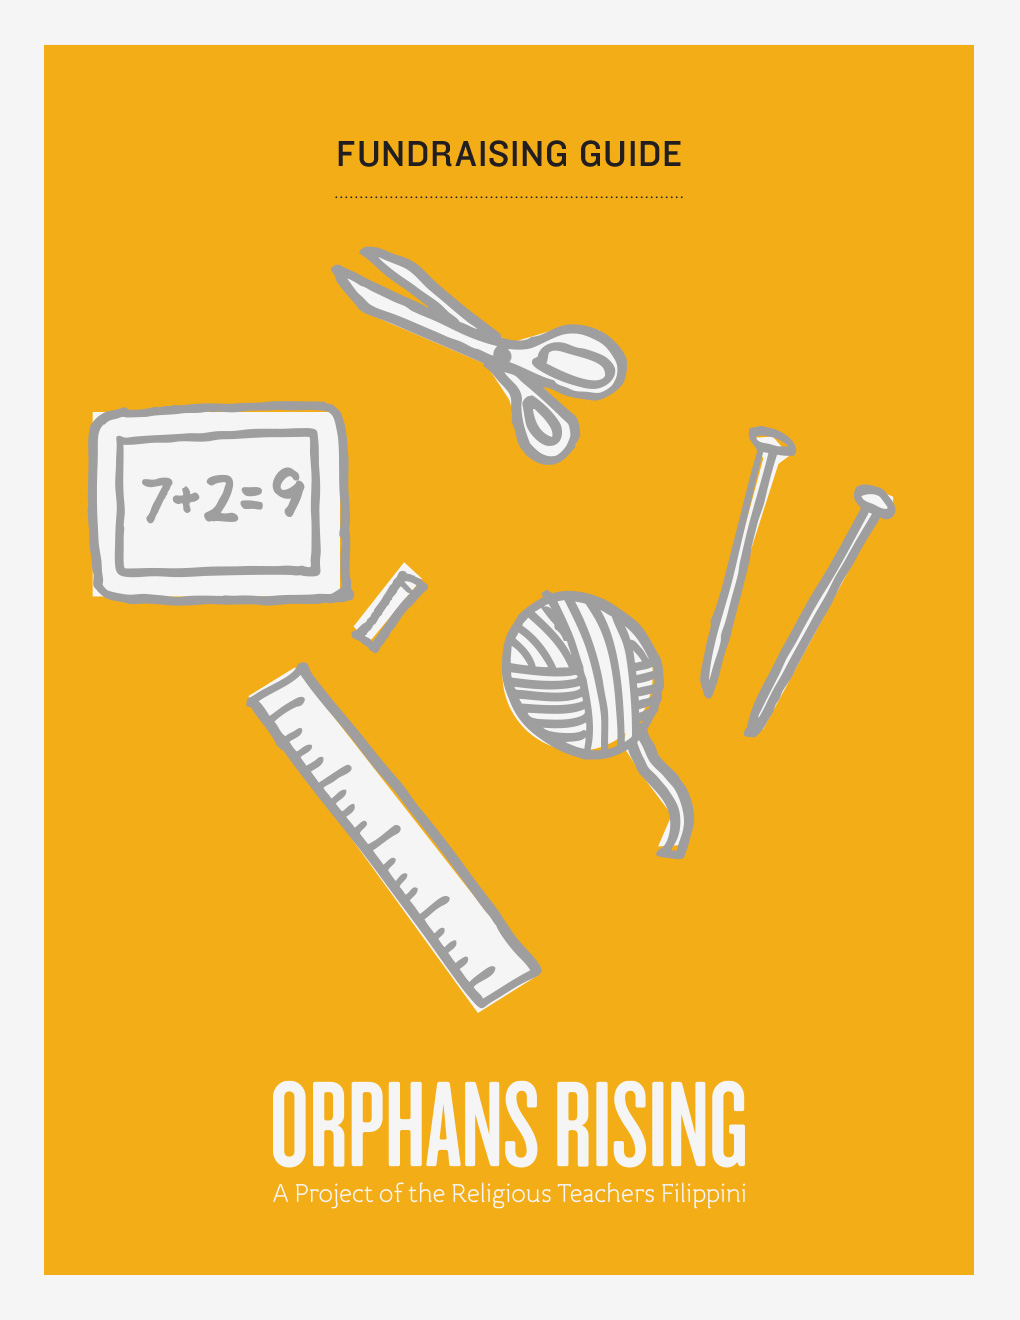 The cover of the Orphans Rising Fundraising Guide, with illustrations of a pair of scissors, a writing tablet, a ruler, a ball of yarn, and knitting needles.